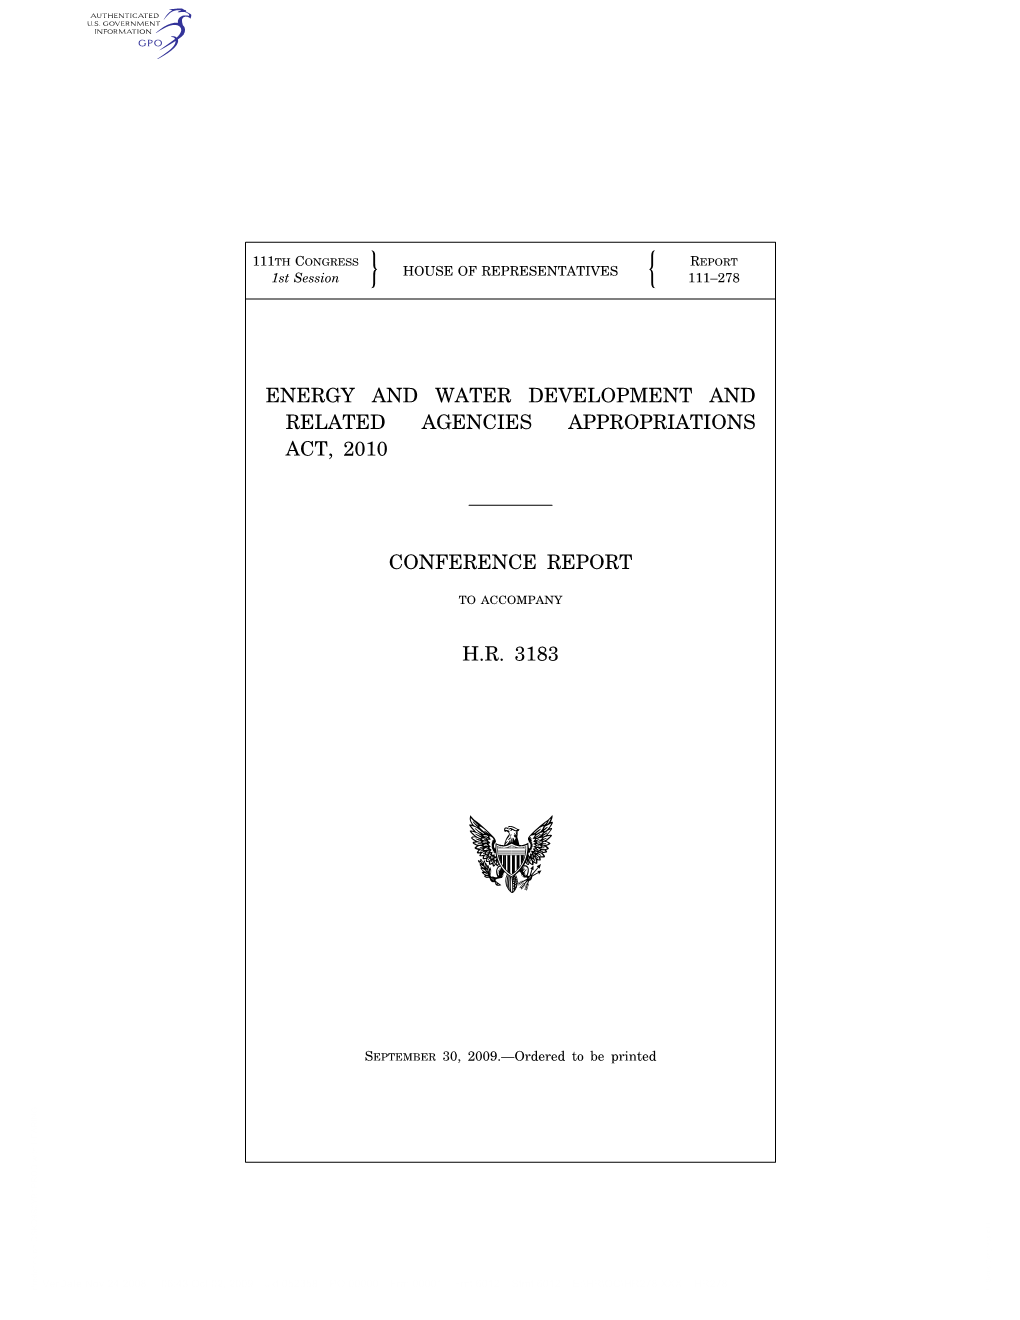 Energy and Water Development and Related Agencies Appropriations Act, 2010